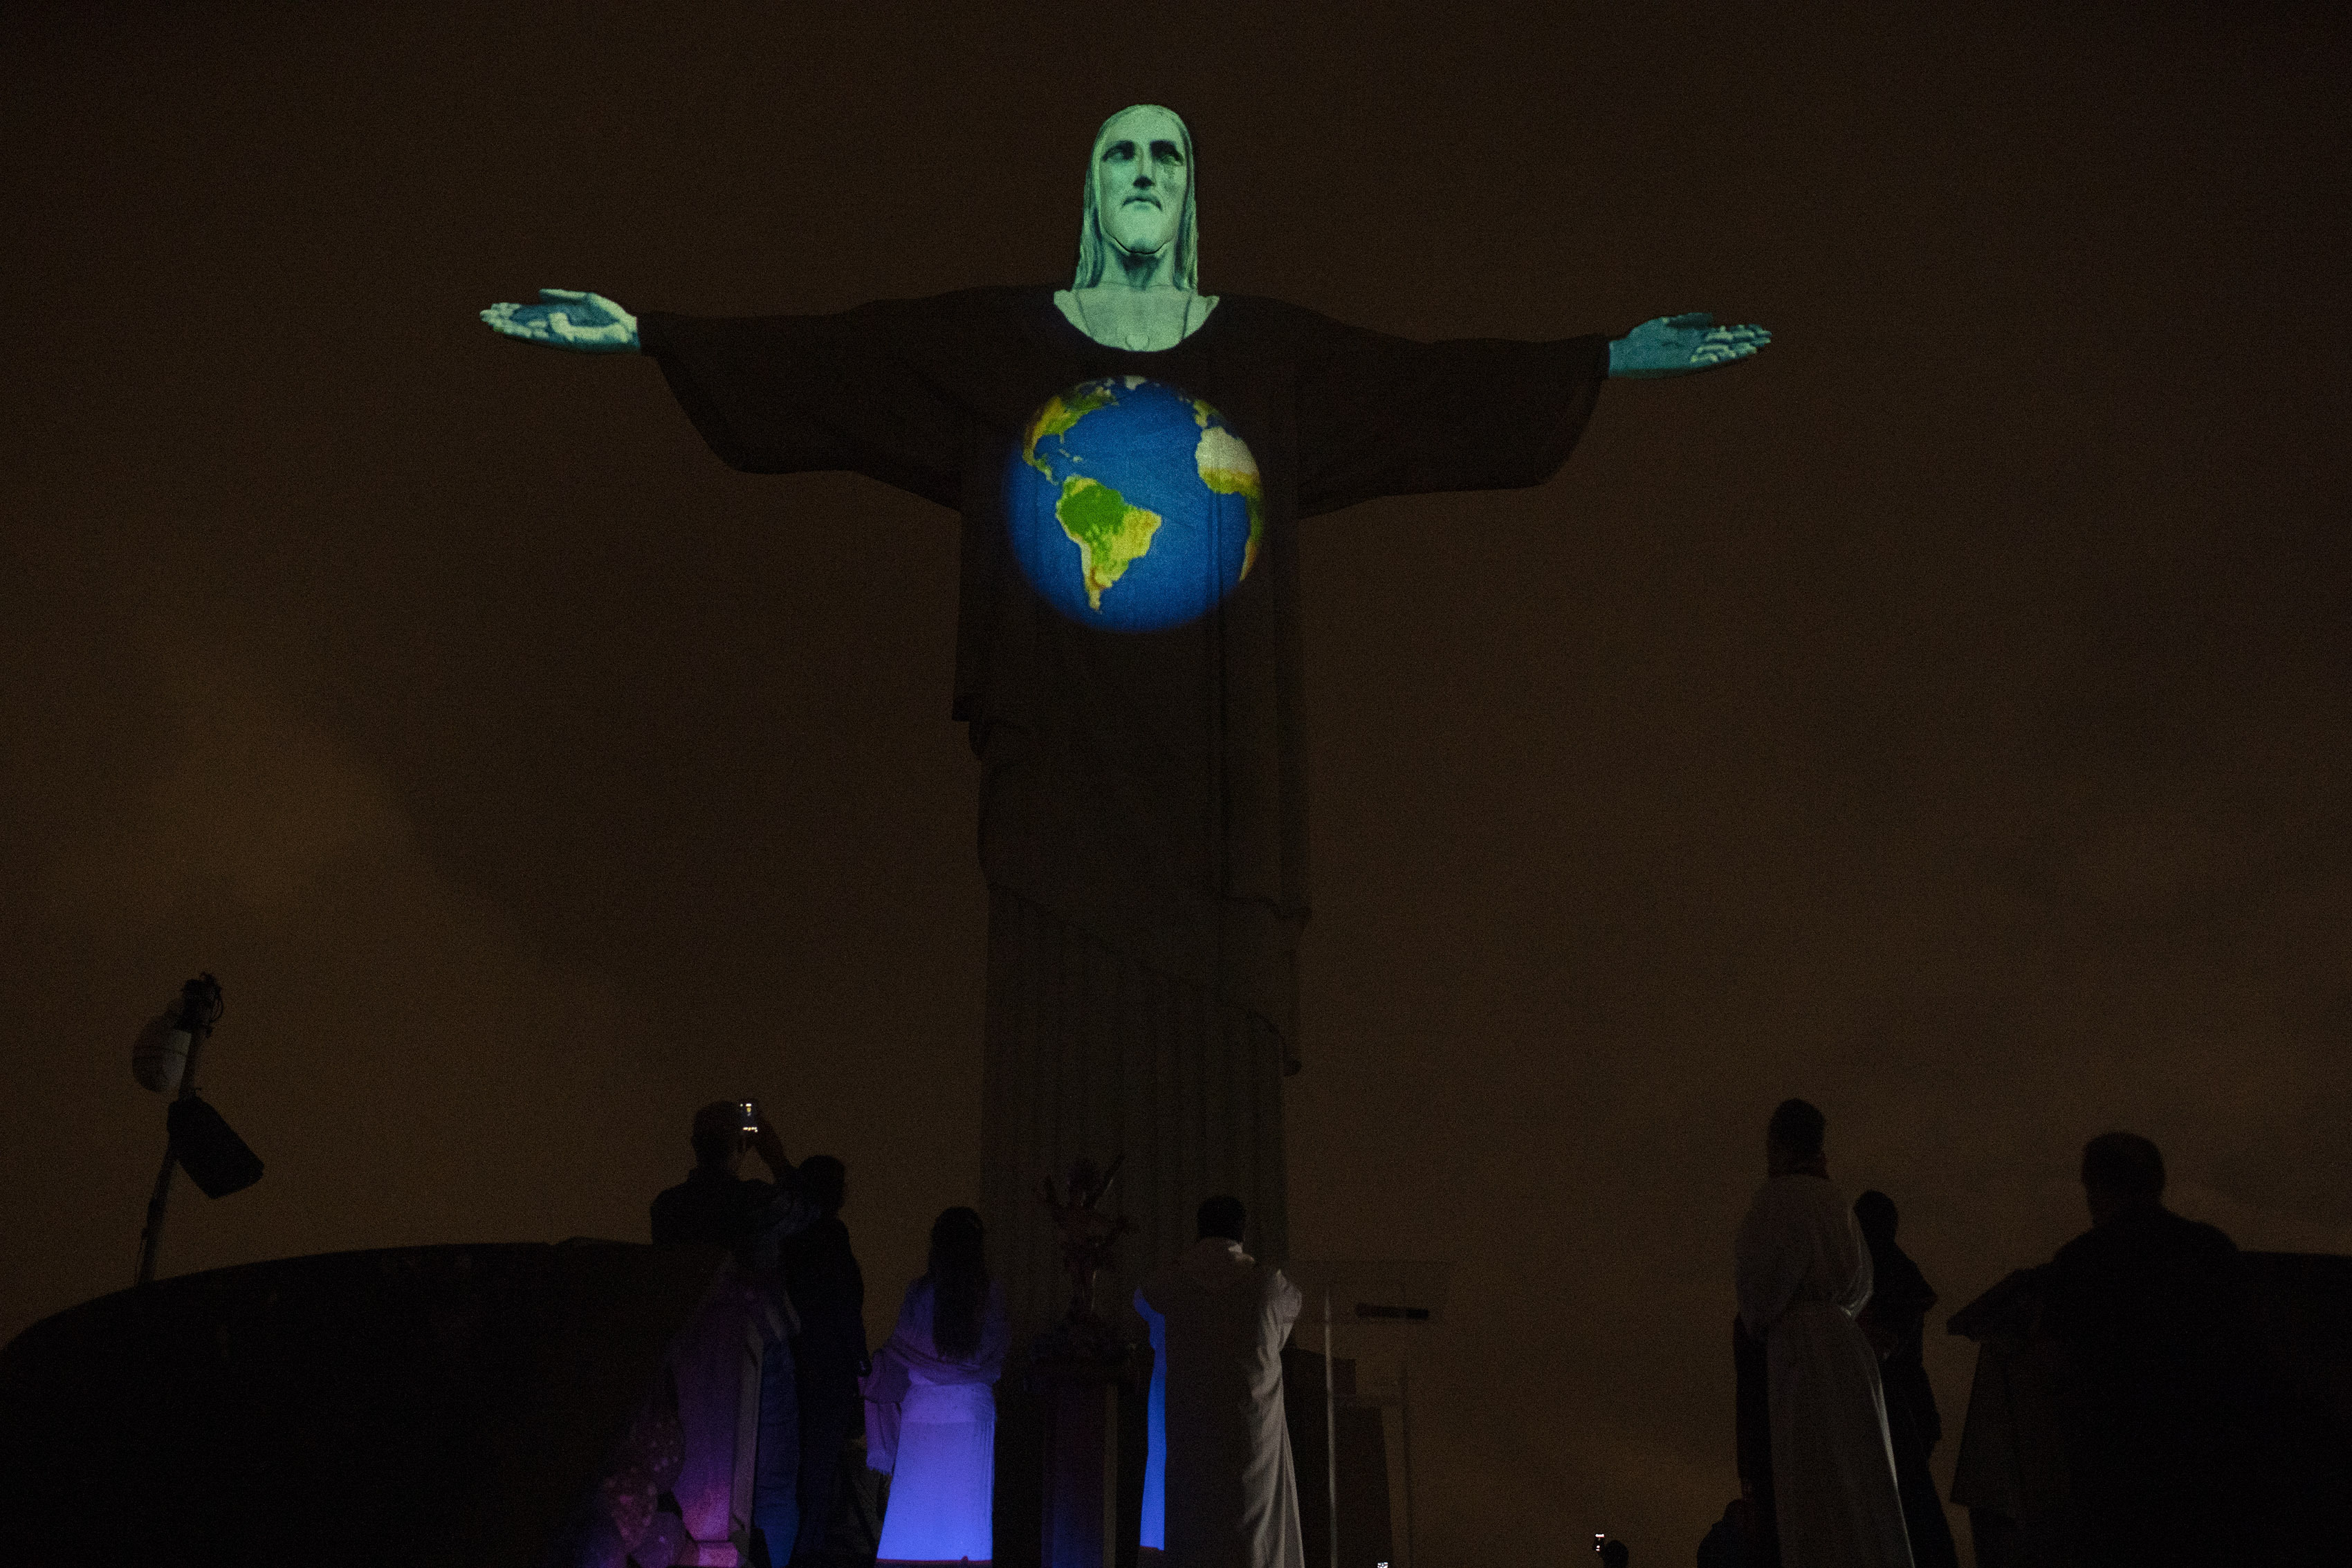 Rio's Christ the Redeemer statue is lit up with an image of the earth, as a way to show support for those afflicted by the new coronavirus, in Rio de Janeiro, Brazil, Wednesday, March 18, 2020. For most people COVID-19 causes mild or moderate symptoms. For others, especially the elderly and people with existing health problems, it can cause many other serious illnesses, including pneumonia. (AP Photo/Silvia Izquierdo)